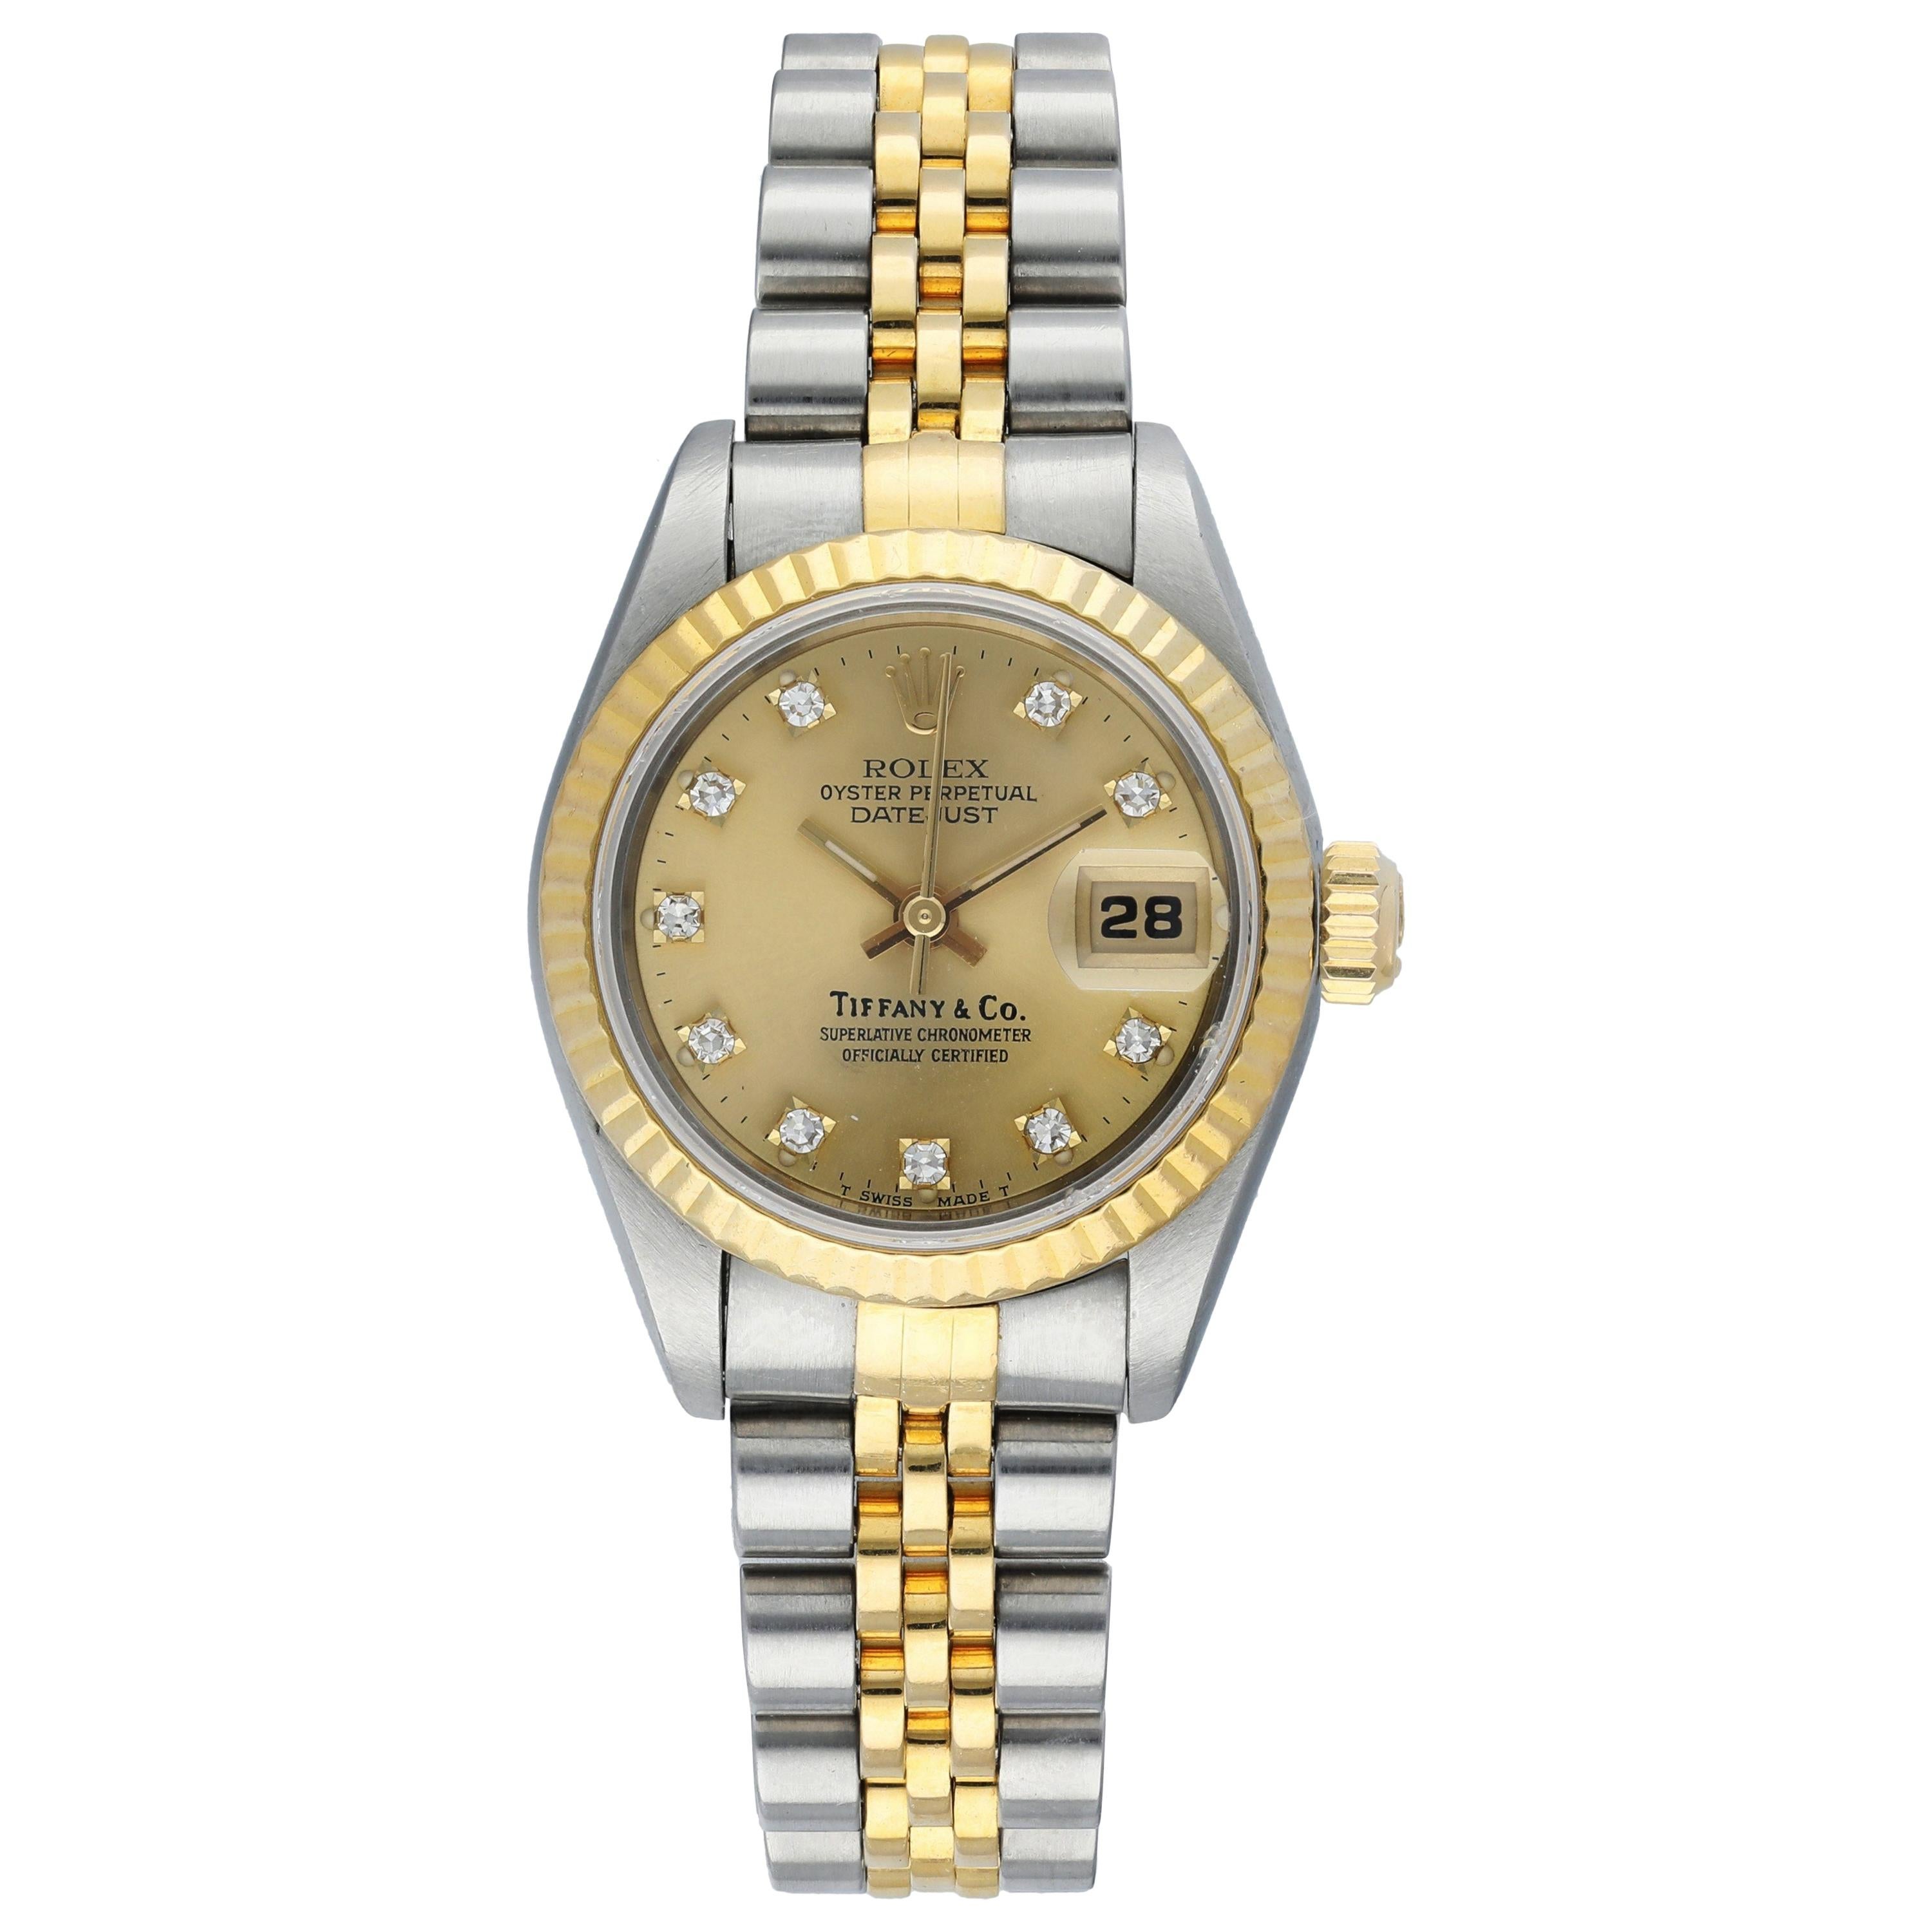 Rolex Datejust 69173 Tiffany & Co. Dial Ladies Watch For Sale